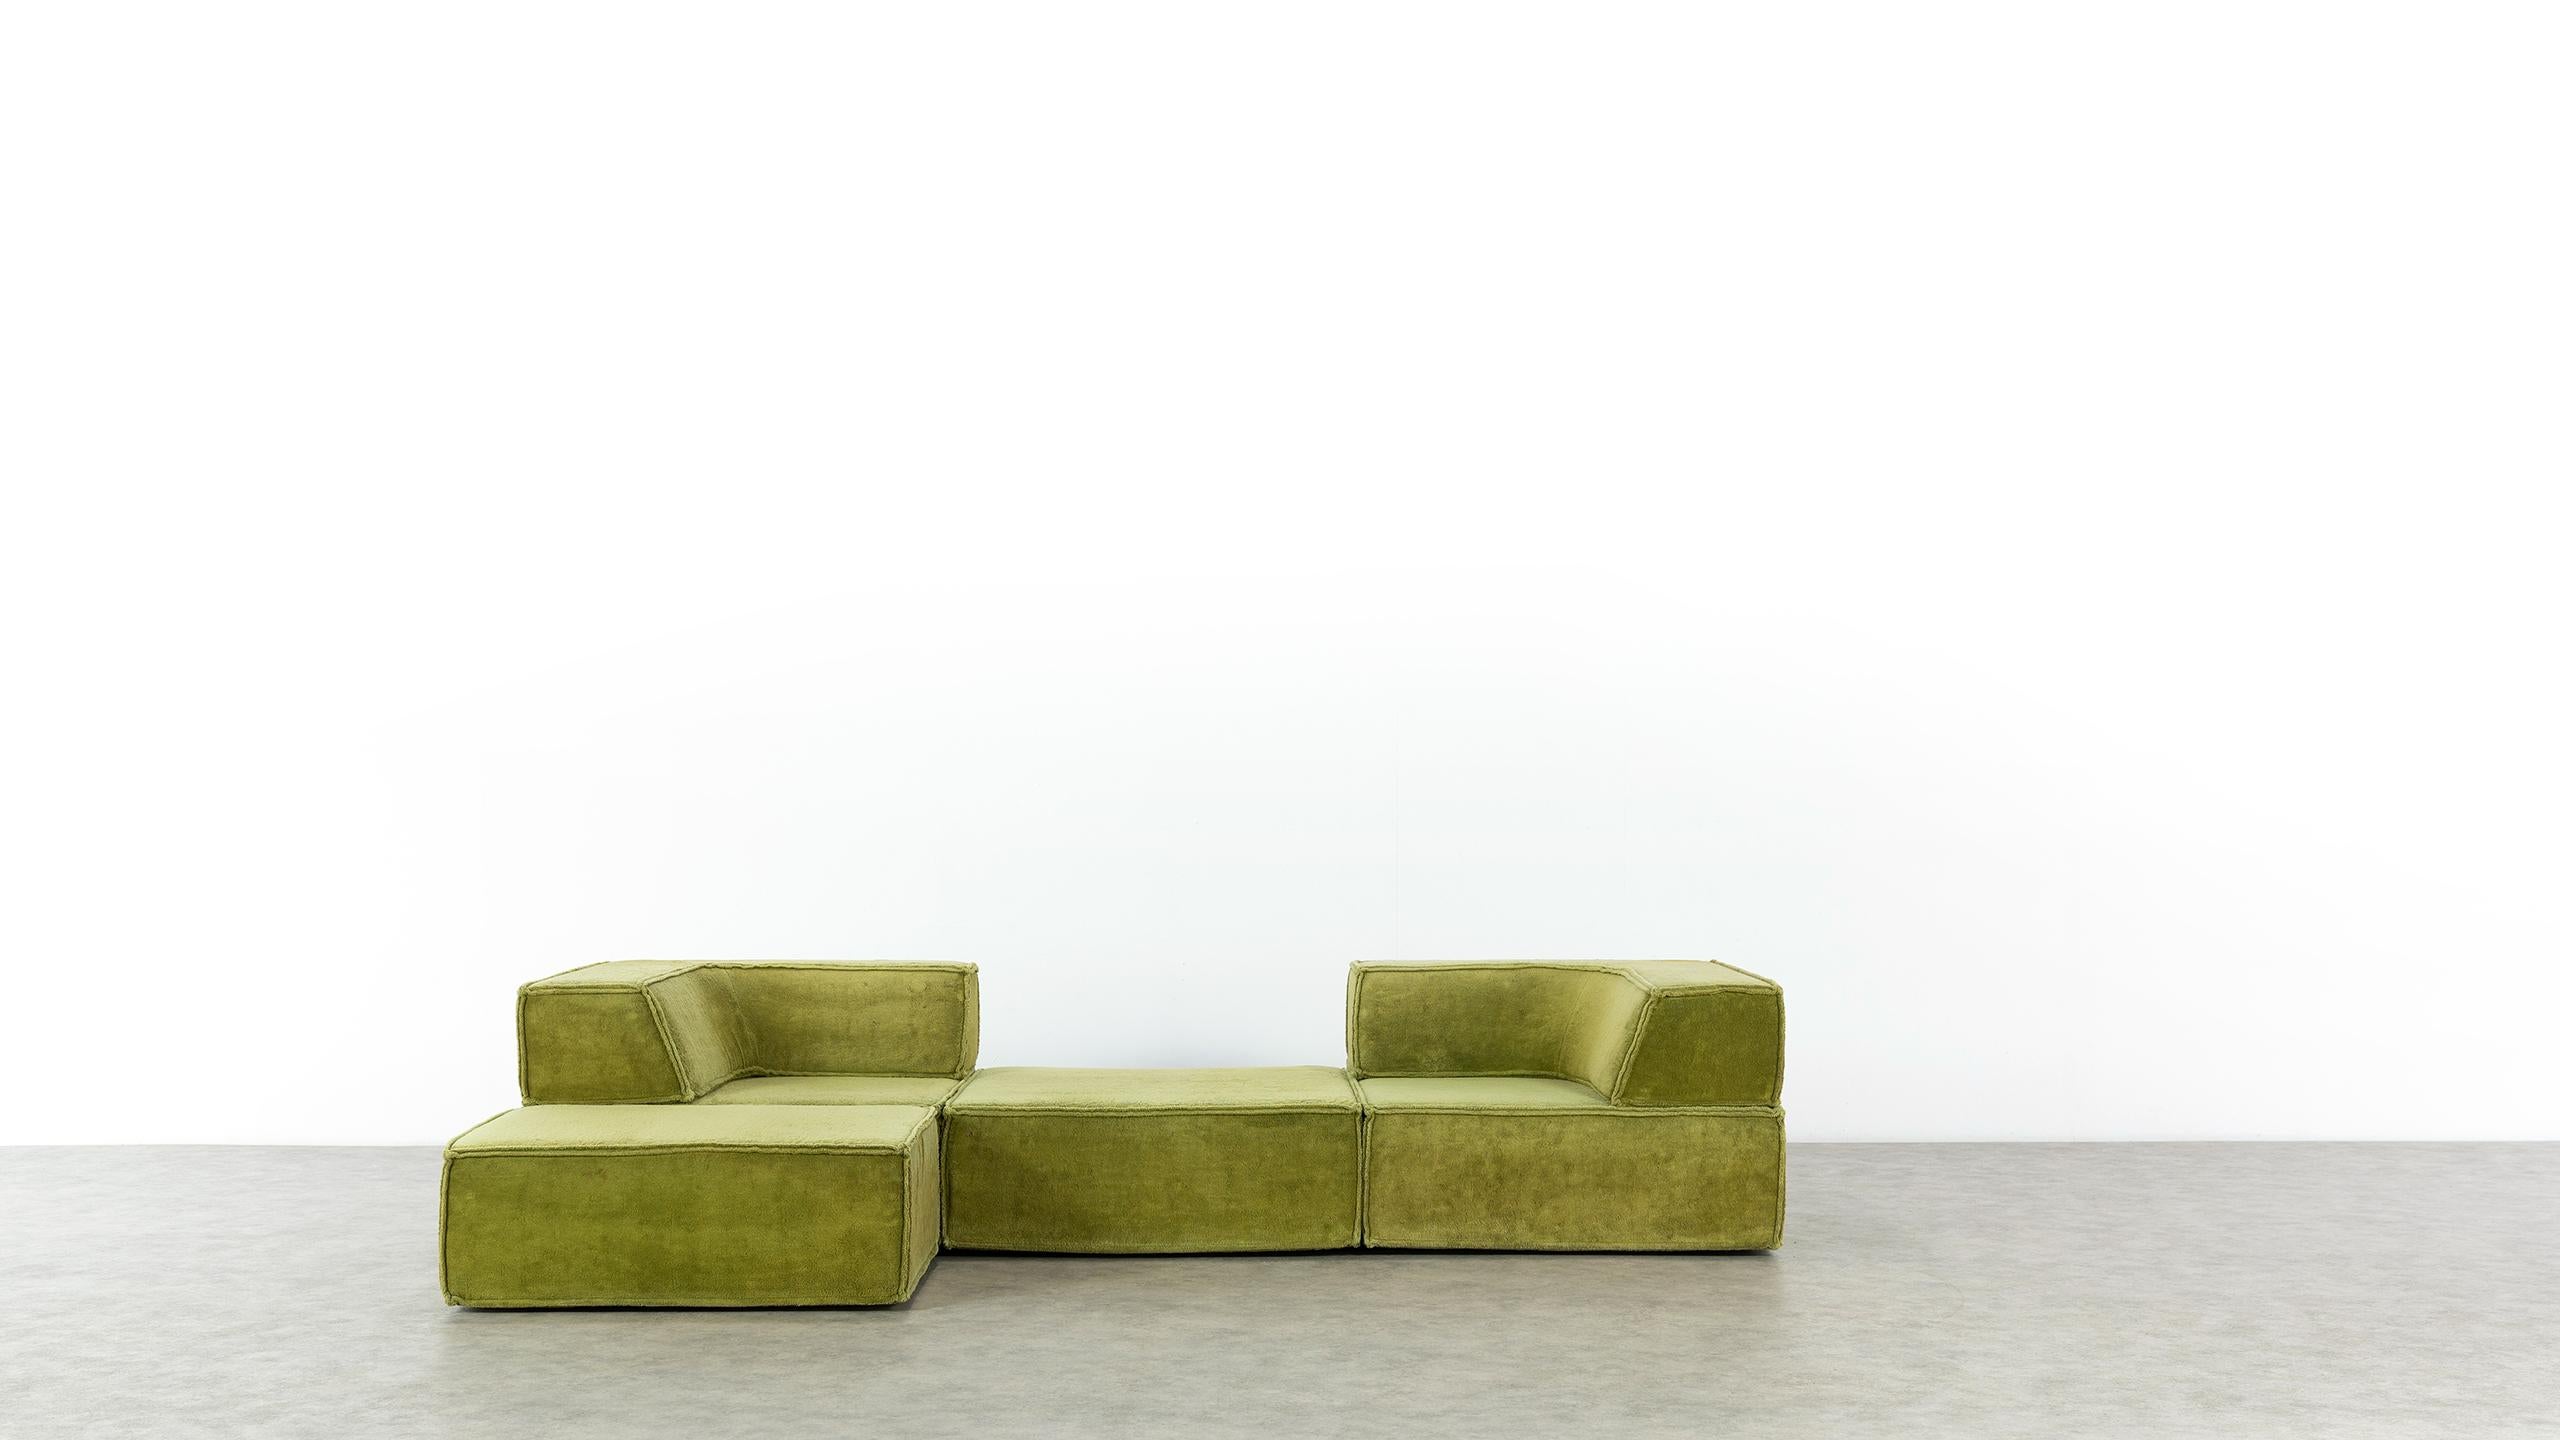 COR Trio Modular Sofa, Giant Landscape in Green, 1972 by Team Form Ag, Swiss 1